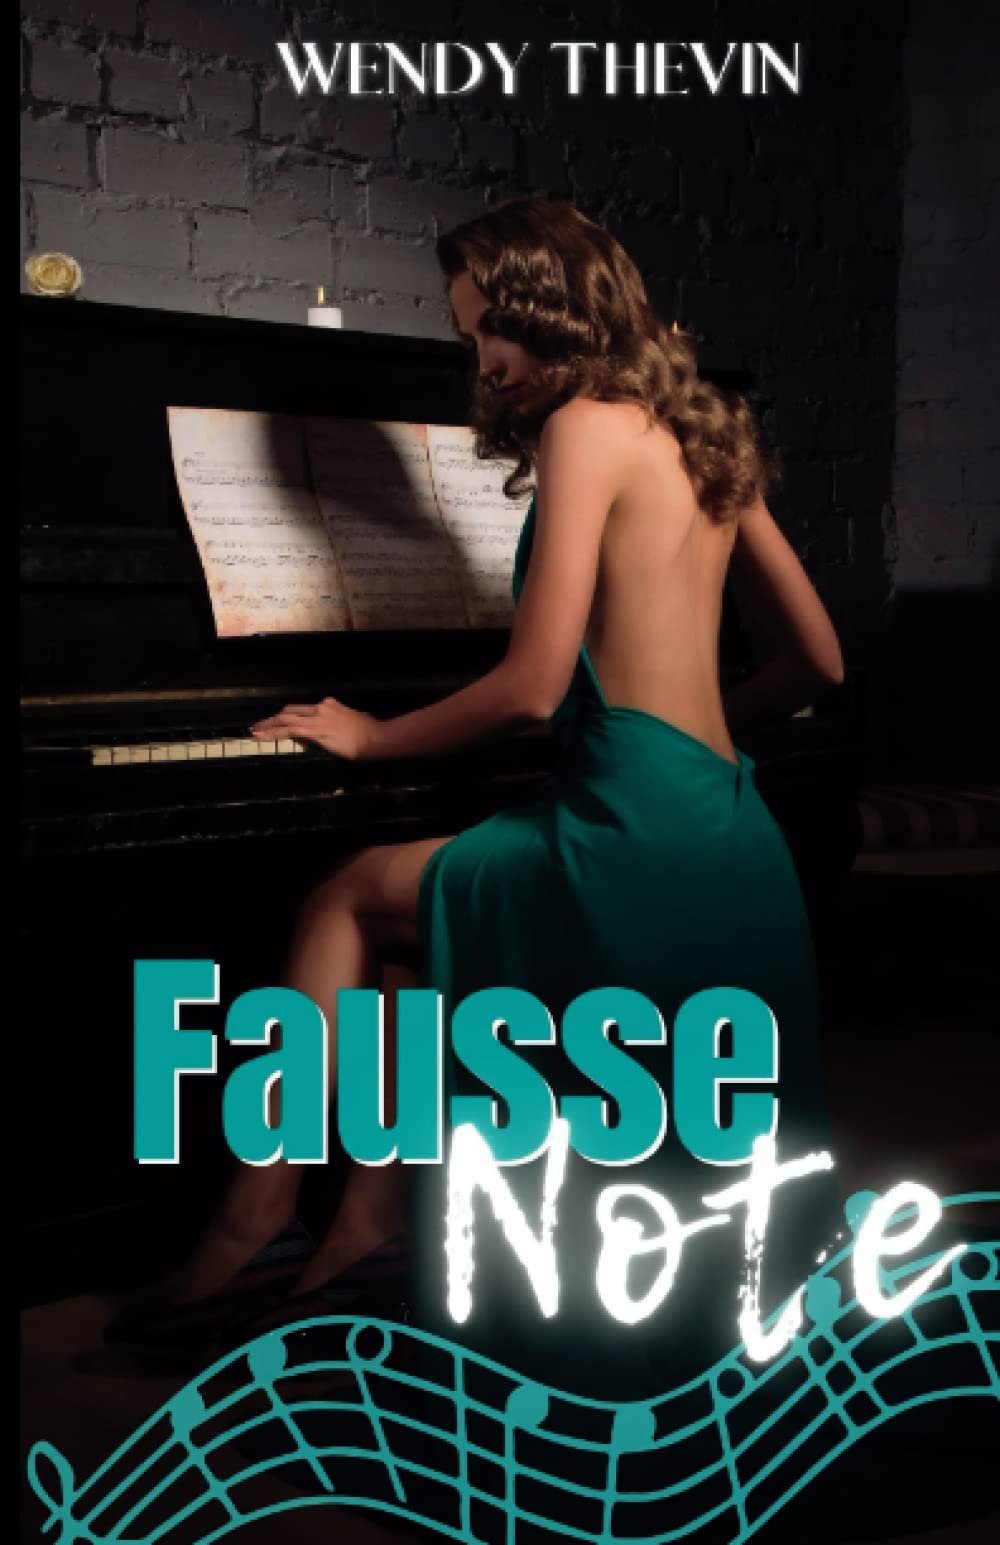 Wendy Thévin – Fausse note